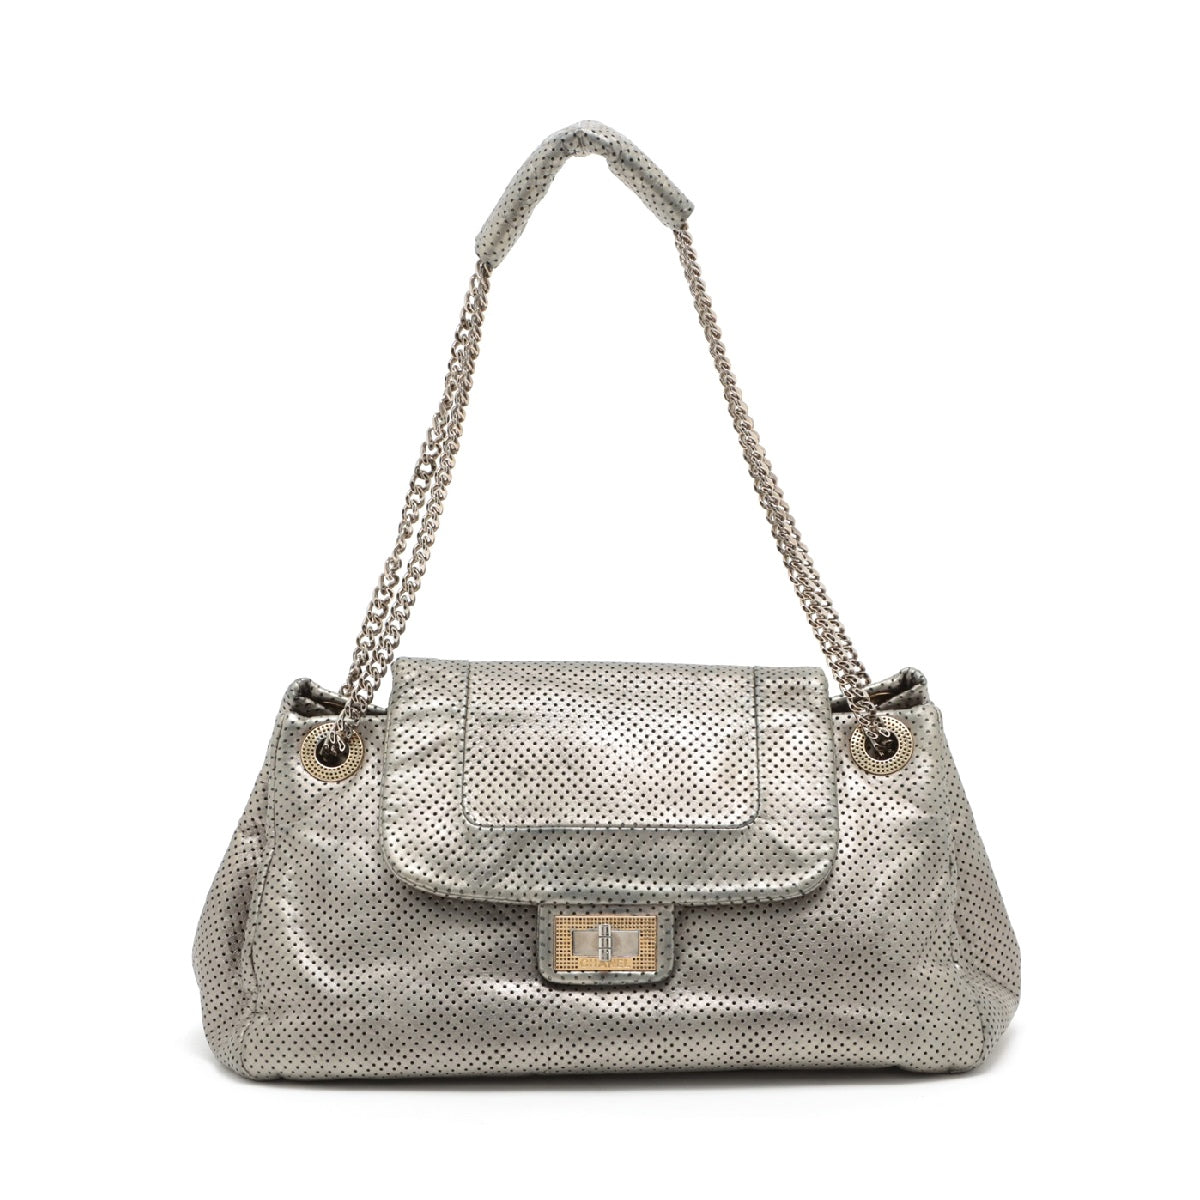 Chanel 2.55 Punching leather Chain Shoulder Bag Silver Gold x Silver Metal Fittings 12XXXXXX